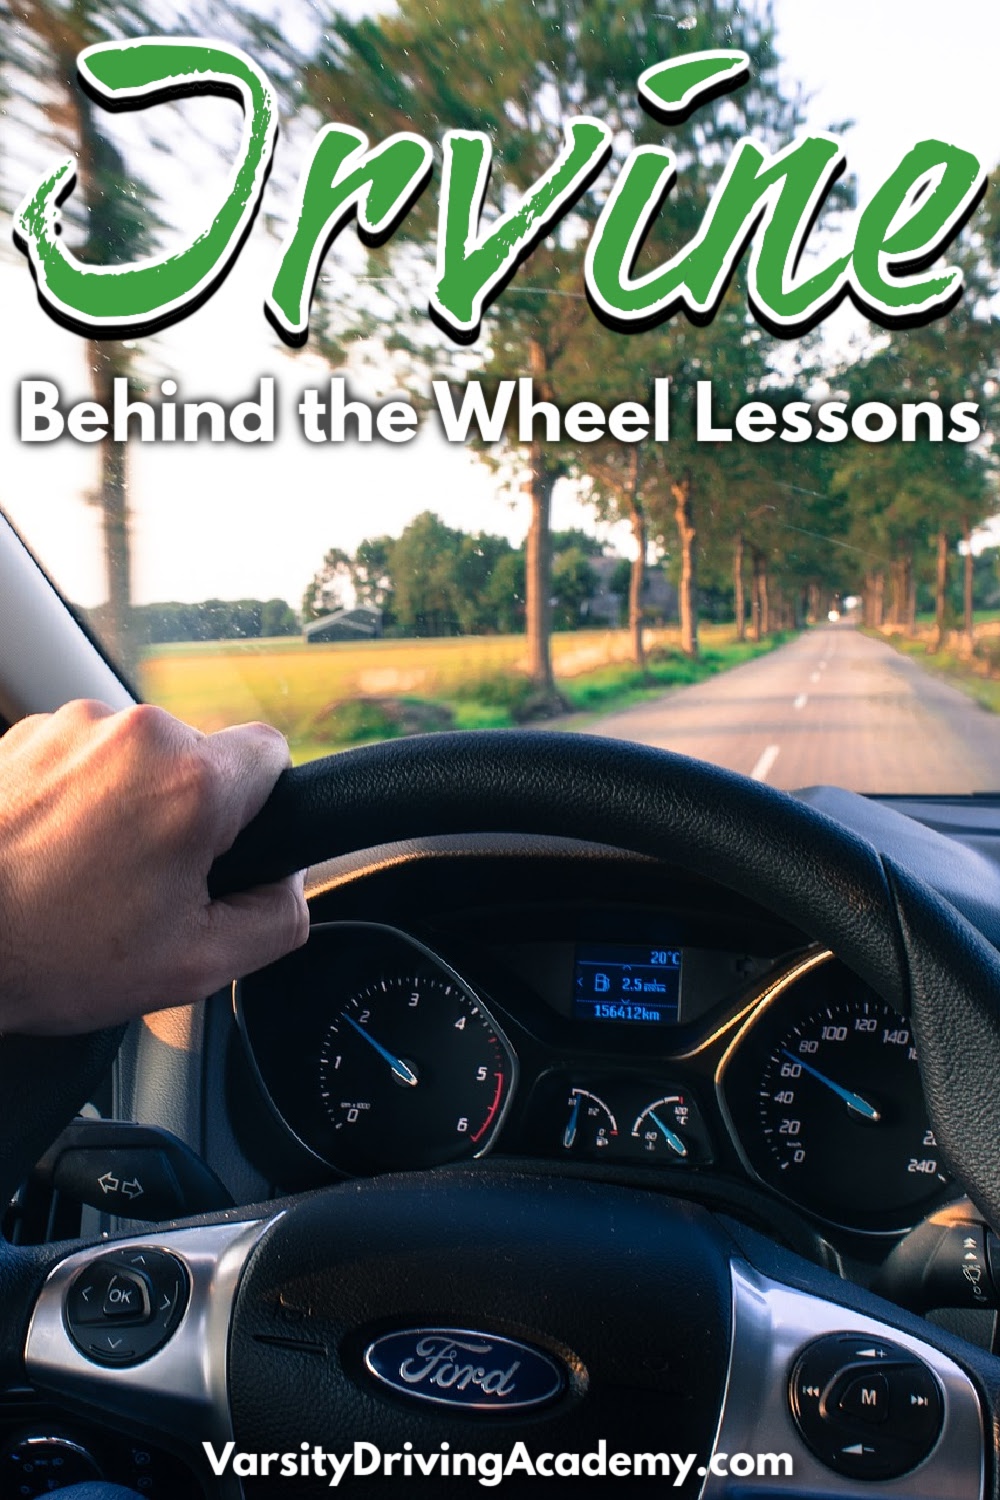 Varsity Driving Academy offers the best Irvine behind the wheel lessons to help you learn how to drive in Irvine and have the confidence to finish drivers ed in Orange County. 